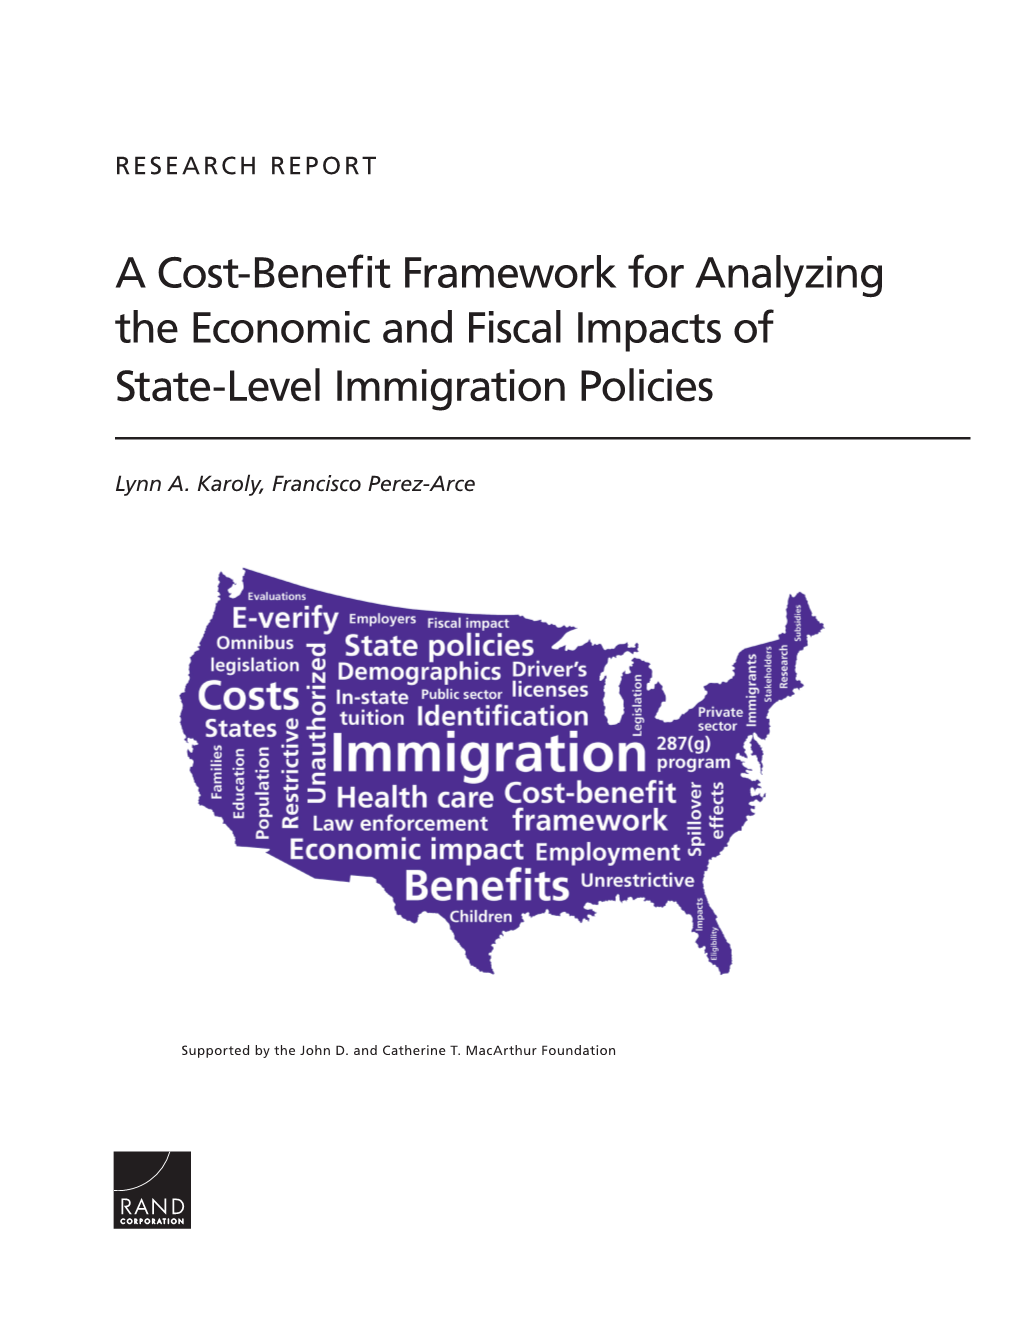 A Cost-Benefit Framework for Analyzing the Economic and Fiscal Impacts of State-Level Immigration Policies